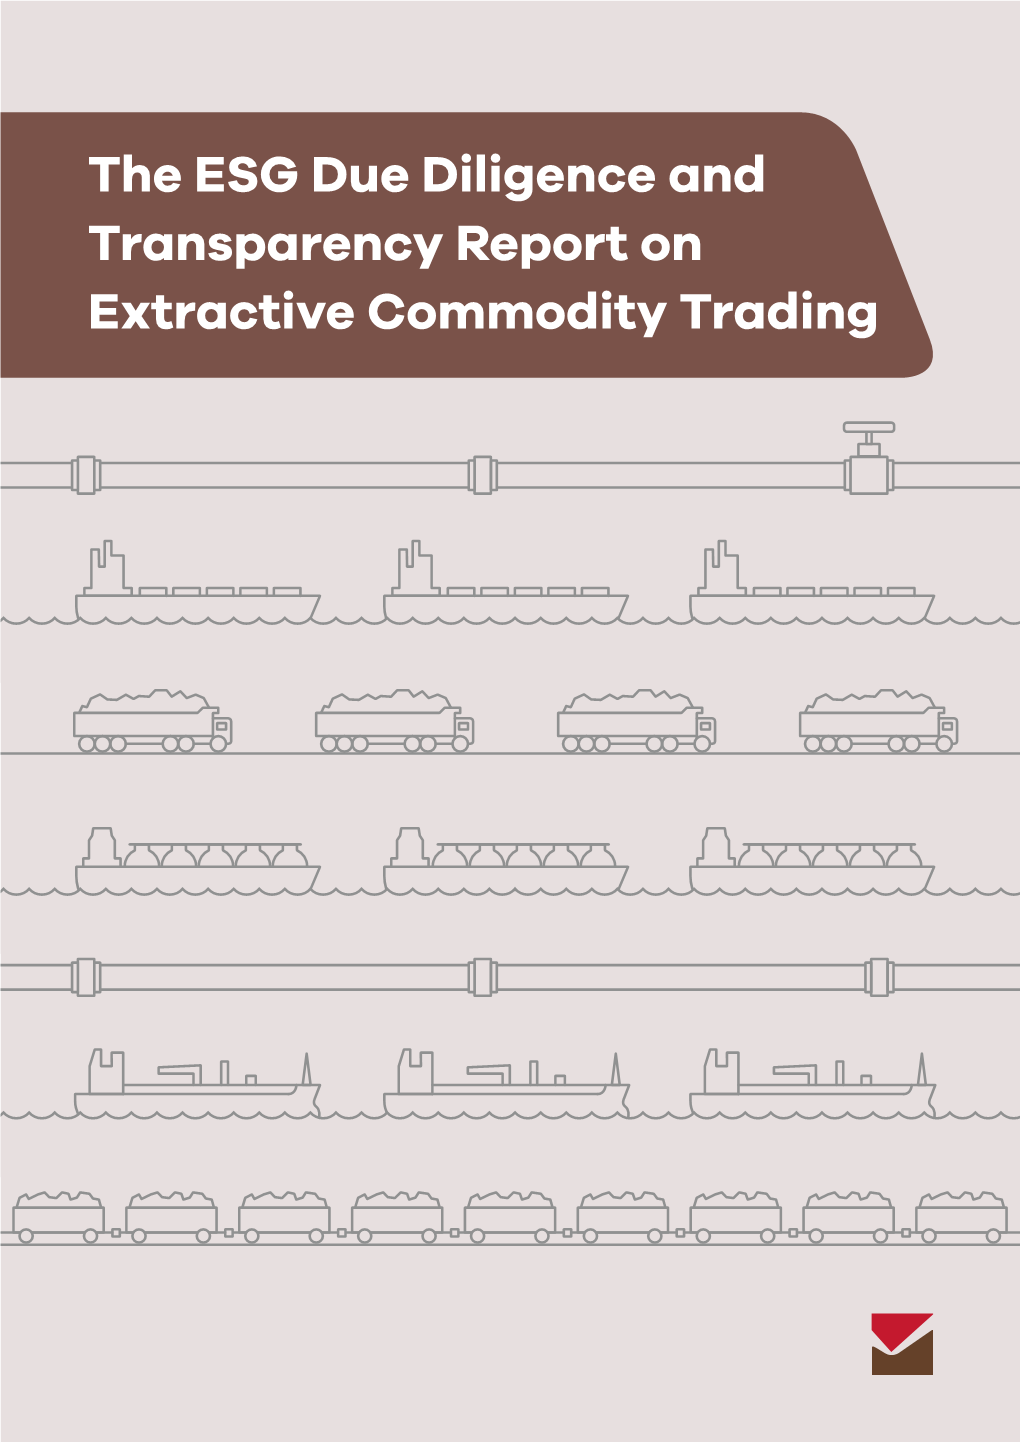 The ESG Due Diligence and Transparency Report on Extractive Commodity Trading Summarises the Results of the Pilot Study on These Issues